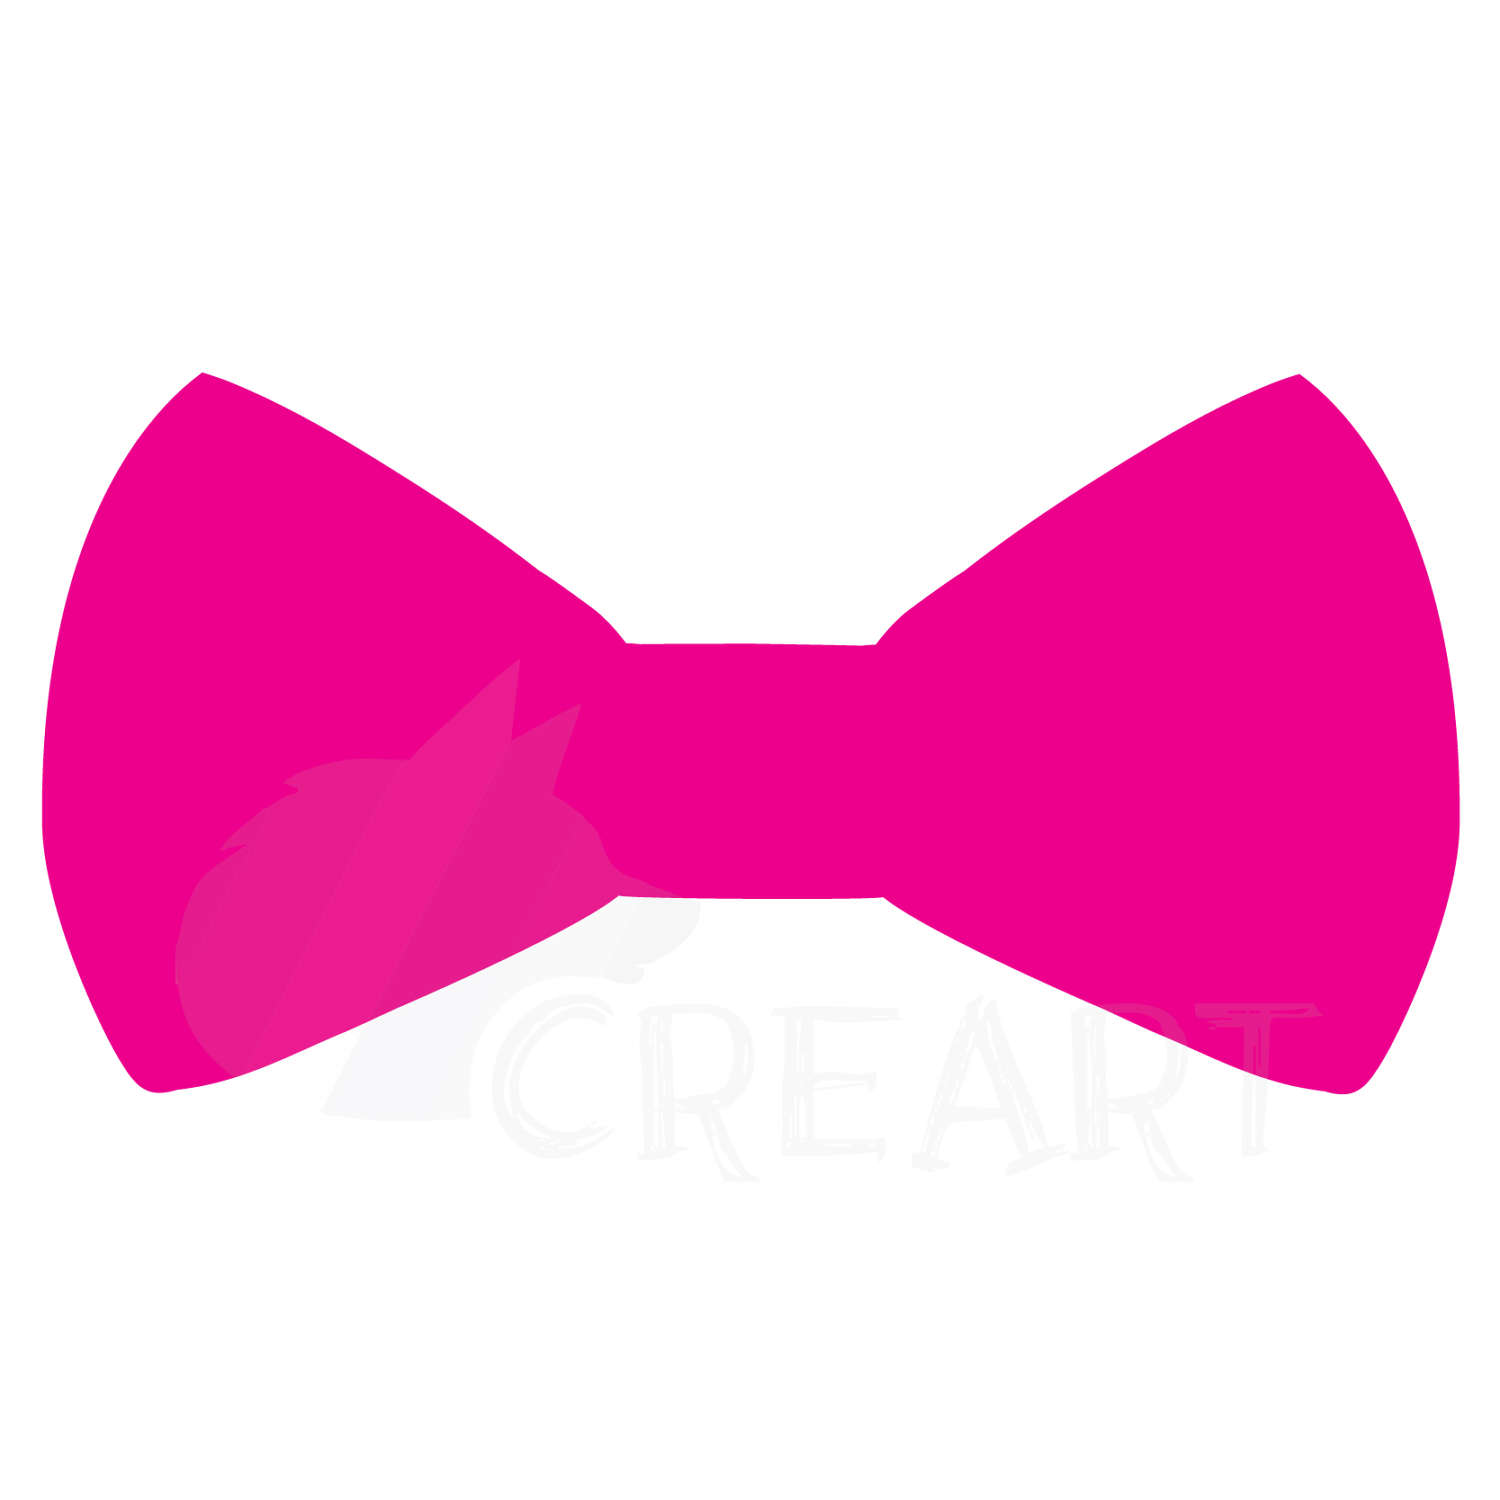 bow tie clipart girly bow pencil and color bow tie